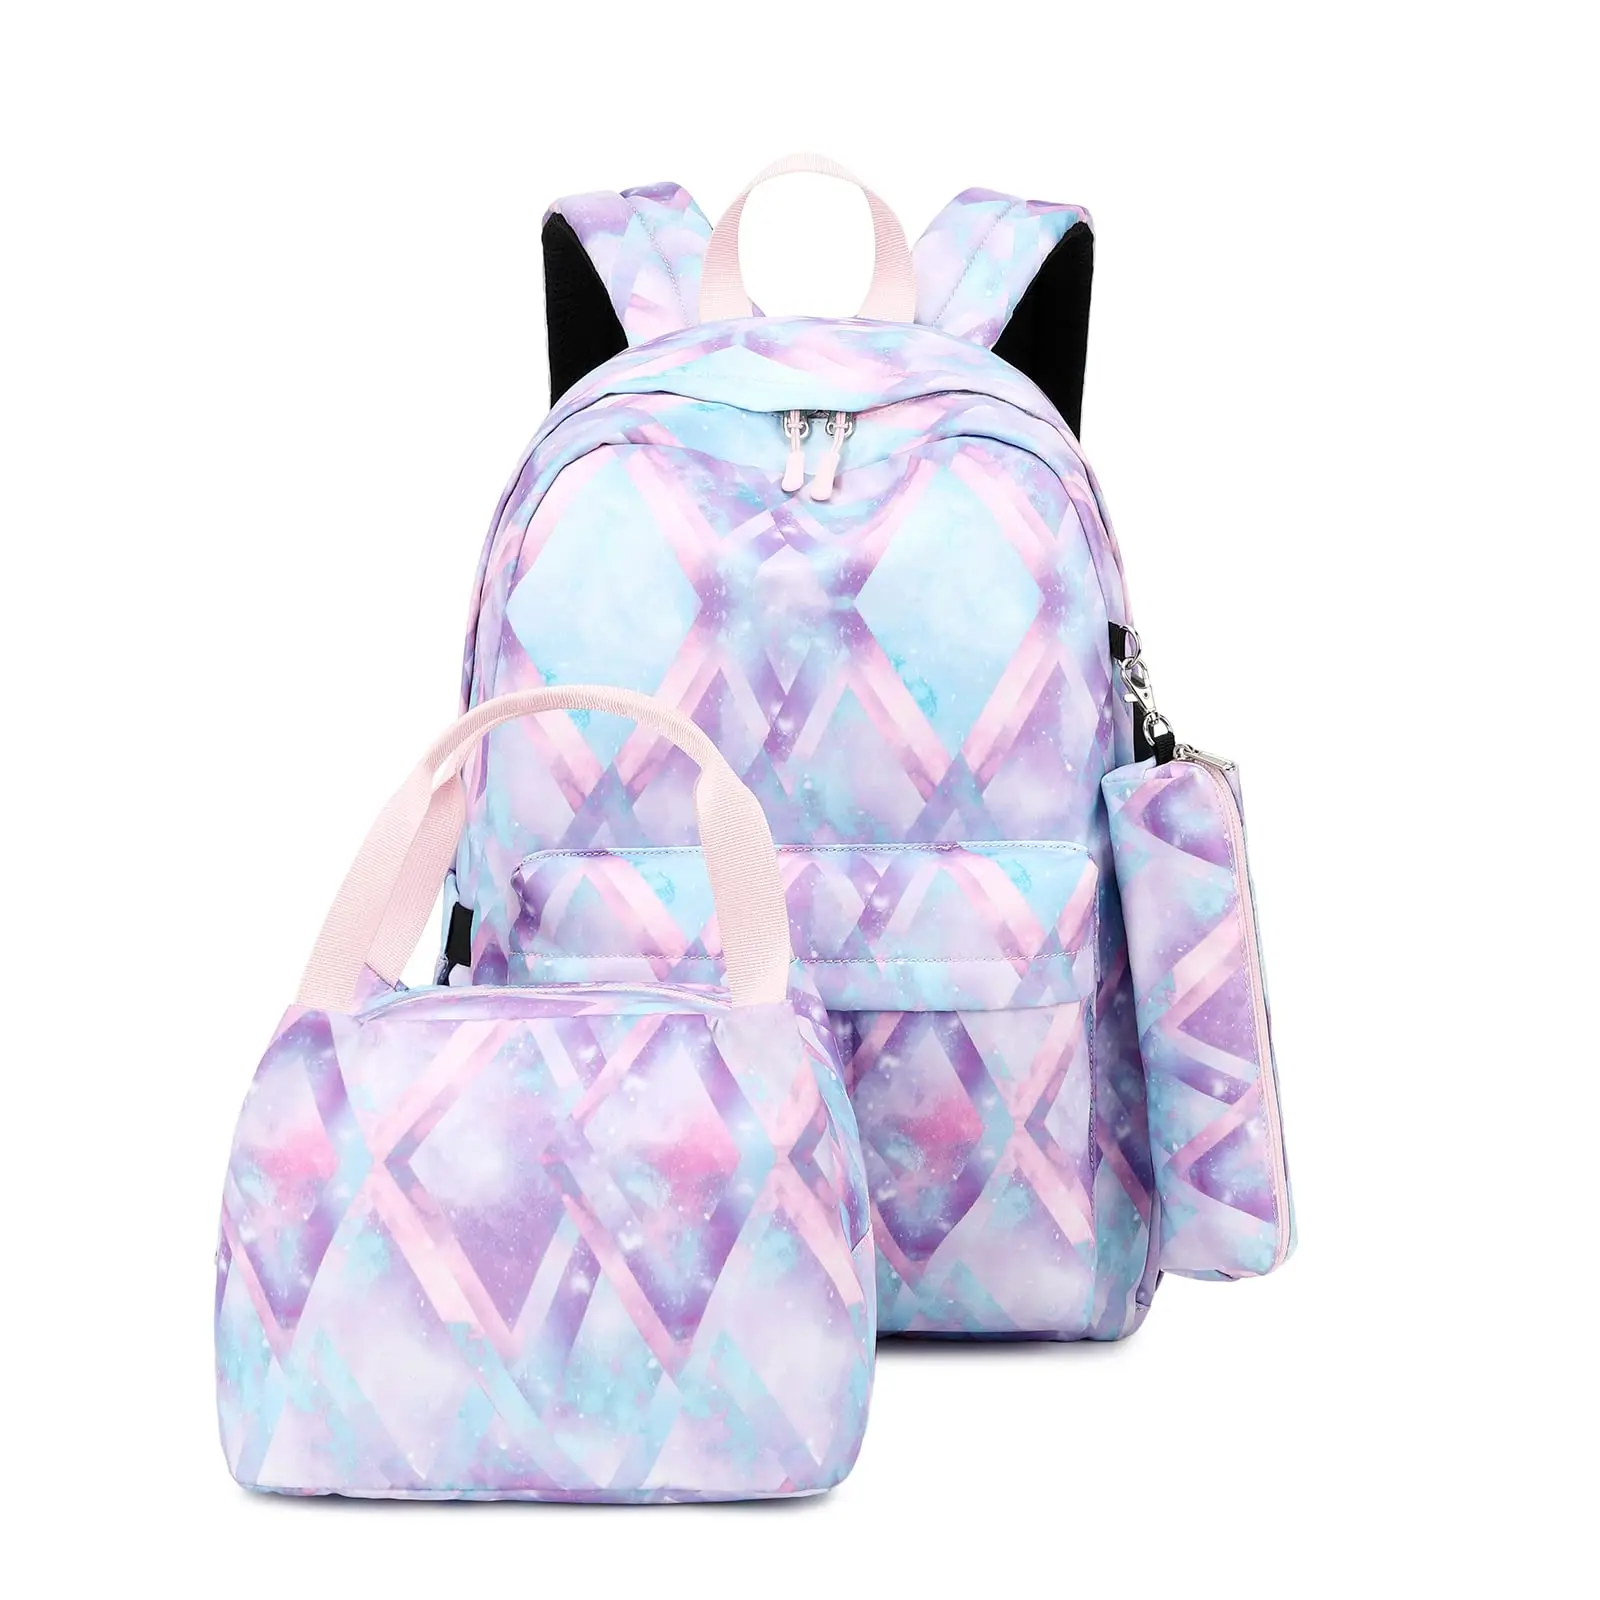 

School Backpacks Girl 3 Pieces with Thermal Bag Case 24 Liters School Backpack for Primary Secondary School Backpack for Girl